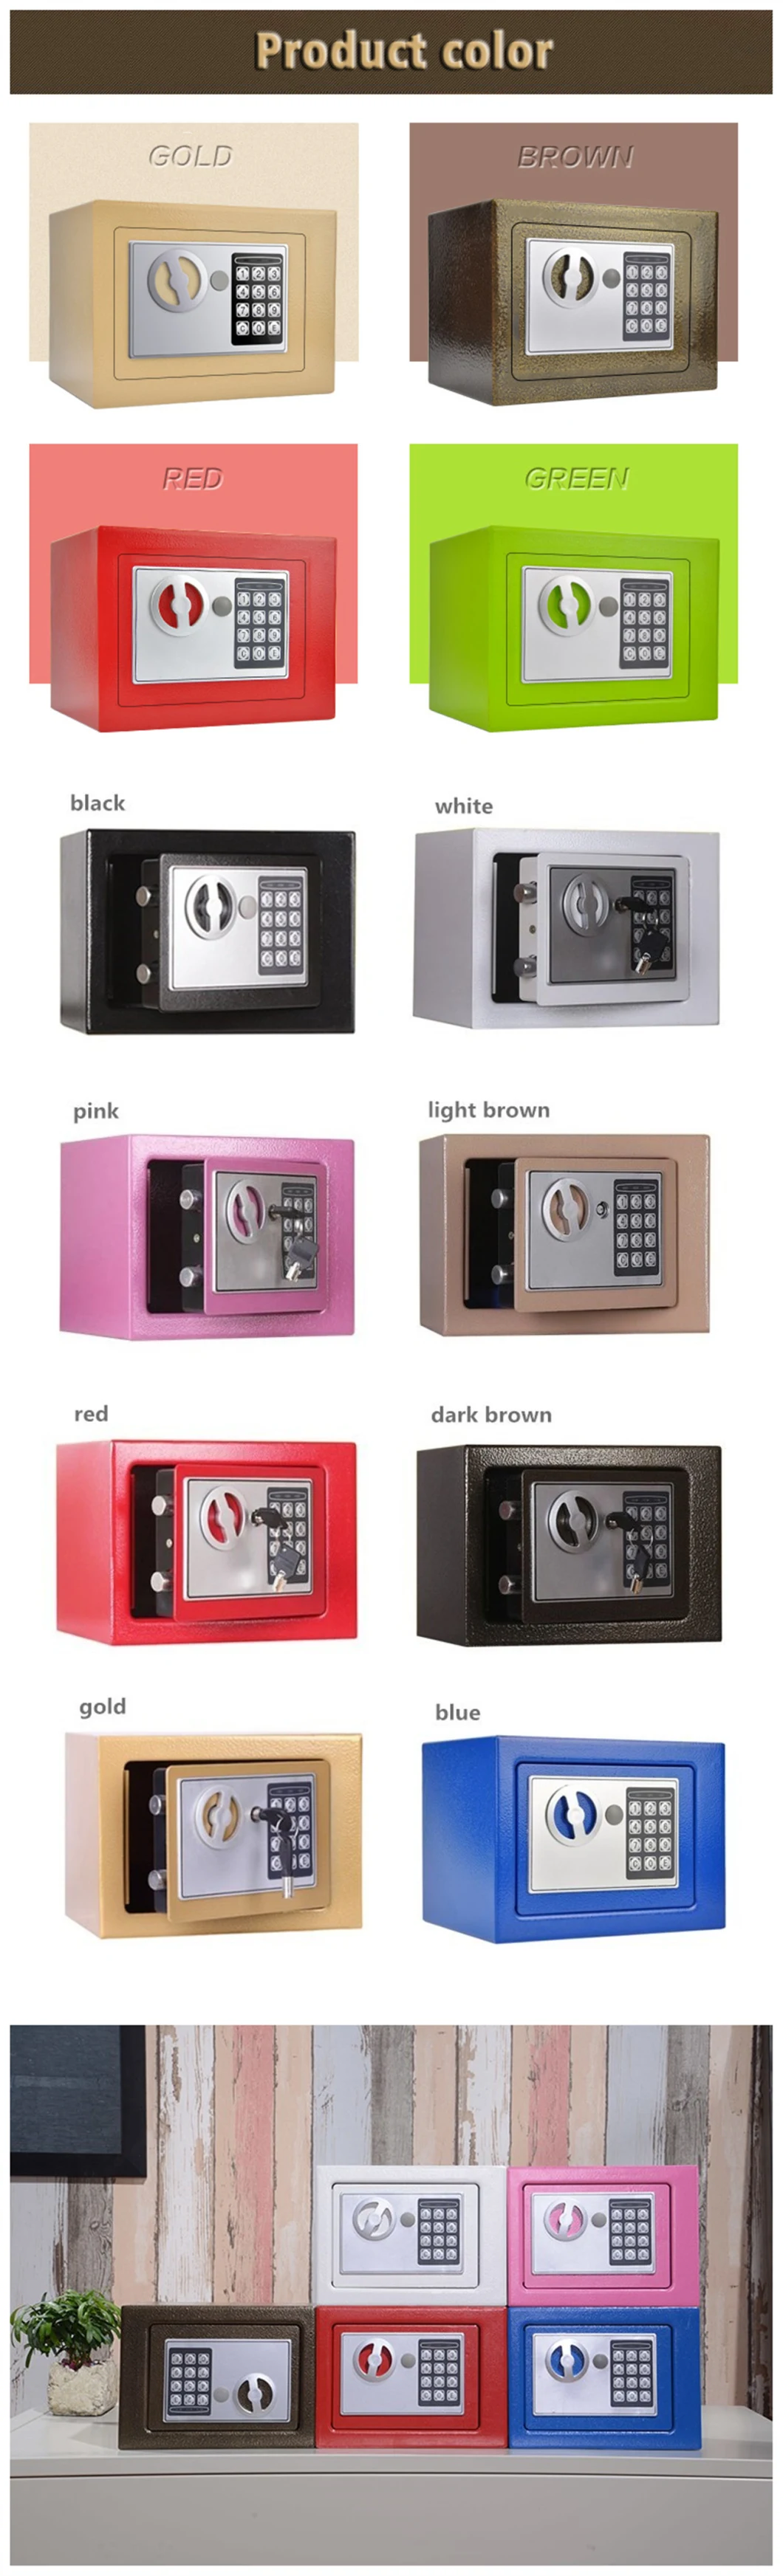 Home Safety Security Hotel Furniture Digital Electronic Safe Box